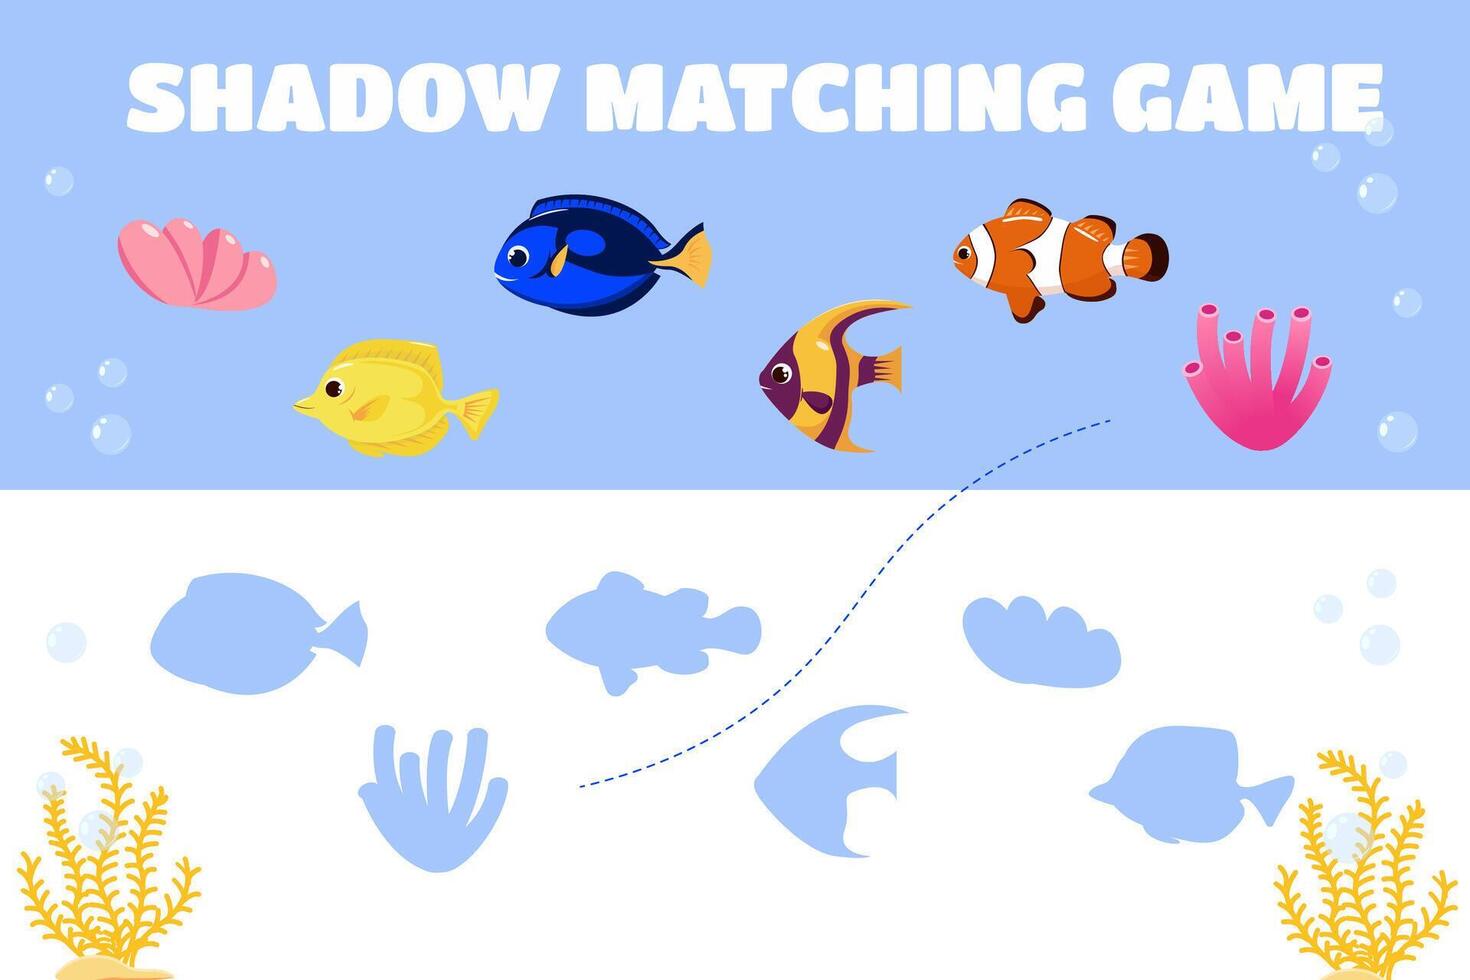 Find the correct shadow Children's educational game vector